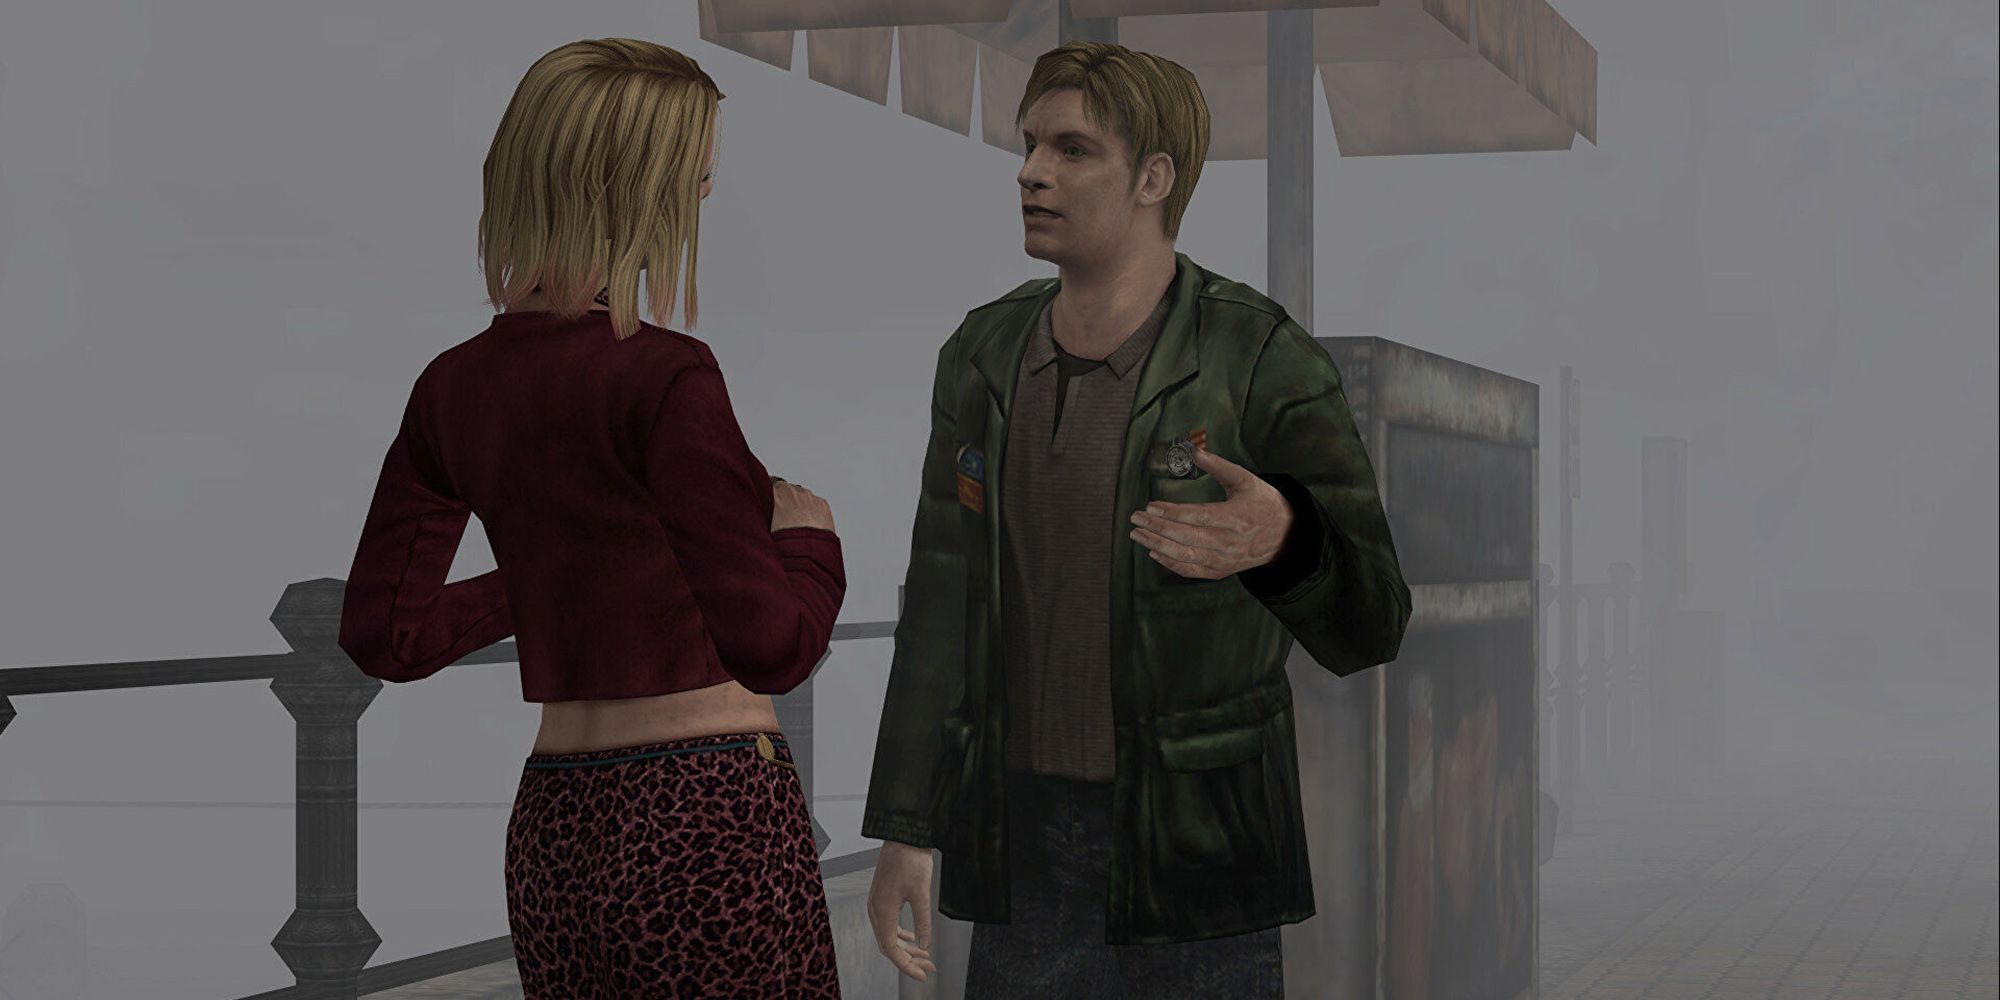 An Image From Silent Hill 2